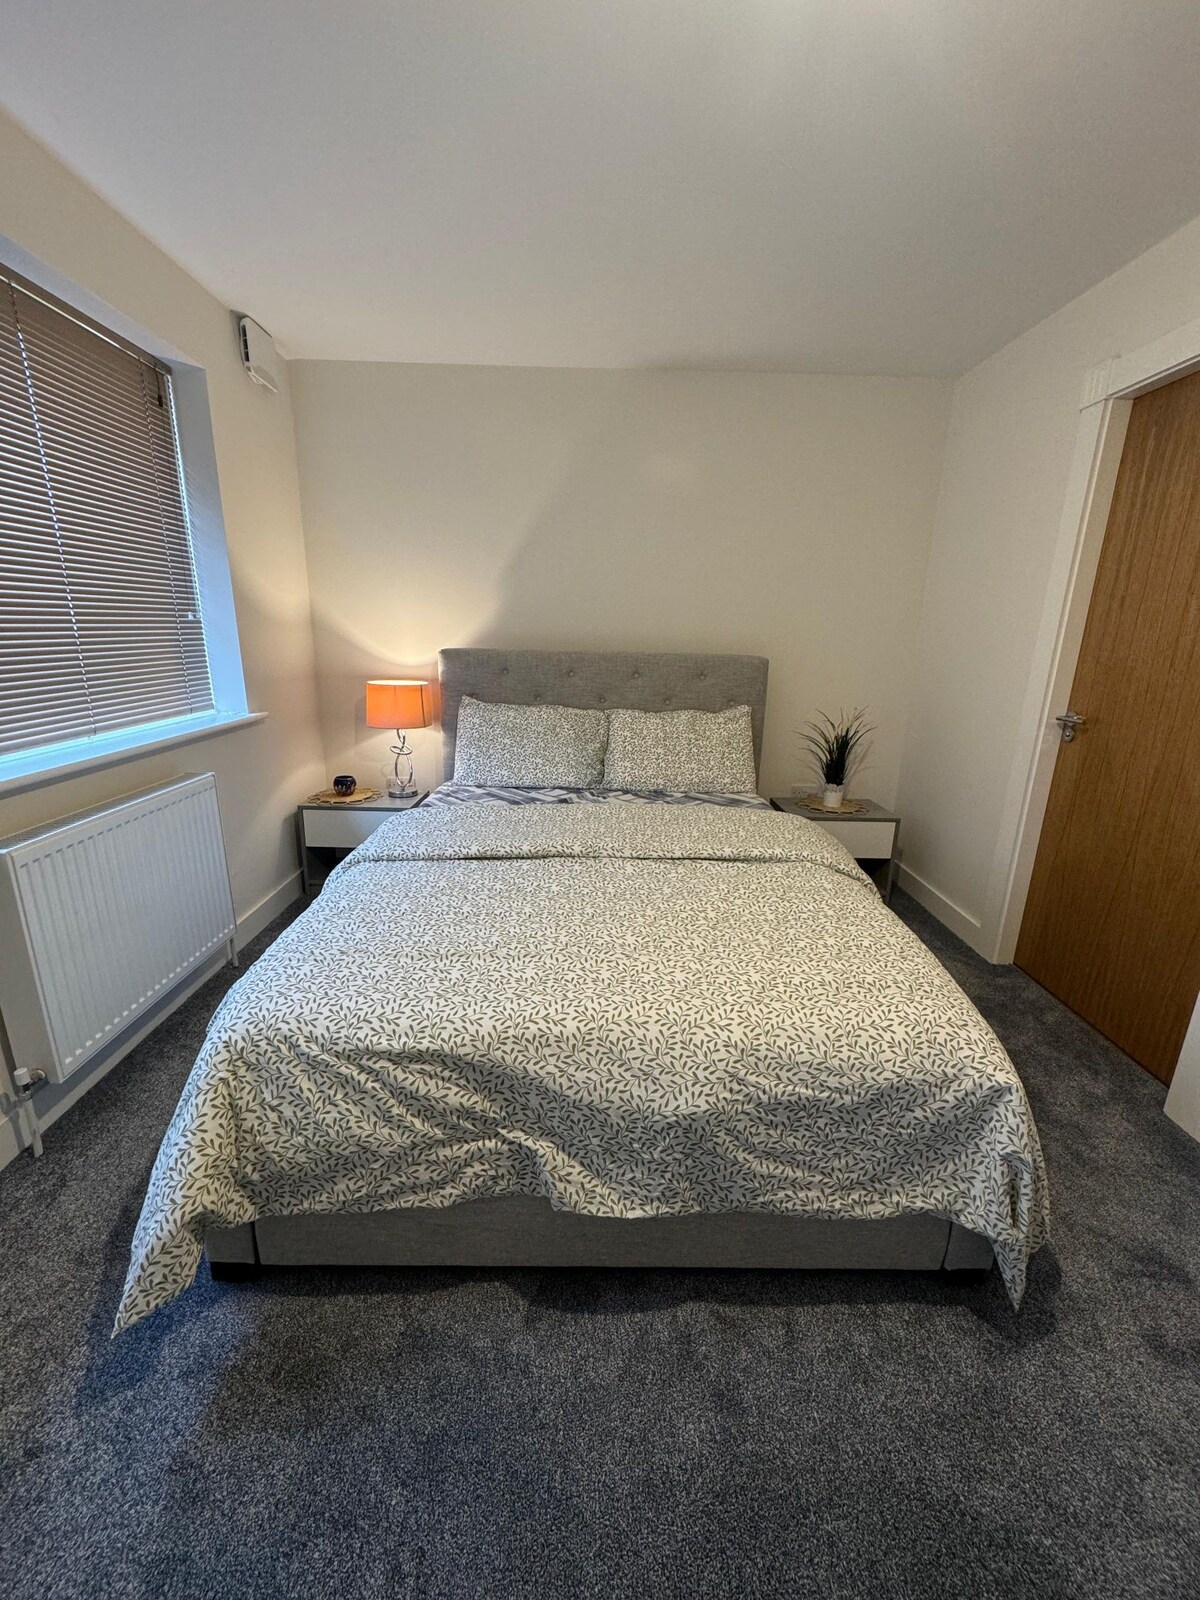 Your stay in Saggart, Dublin: Cozy ensuite room